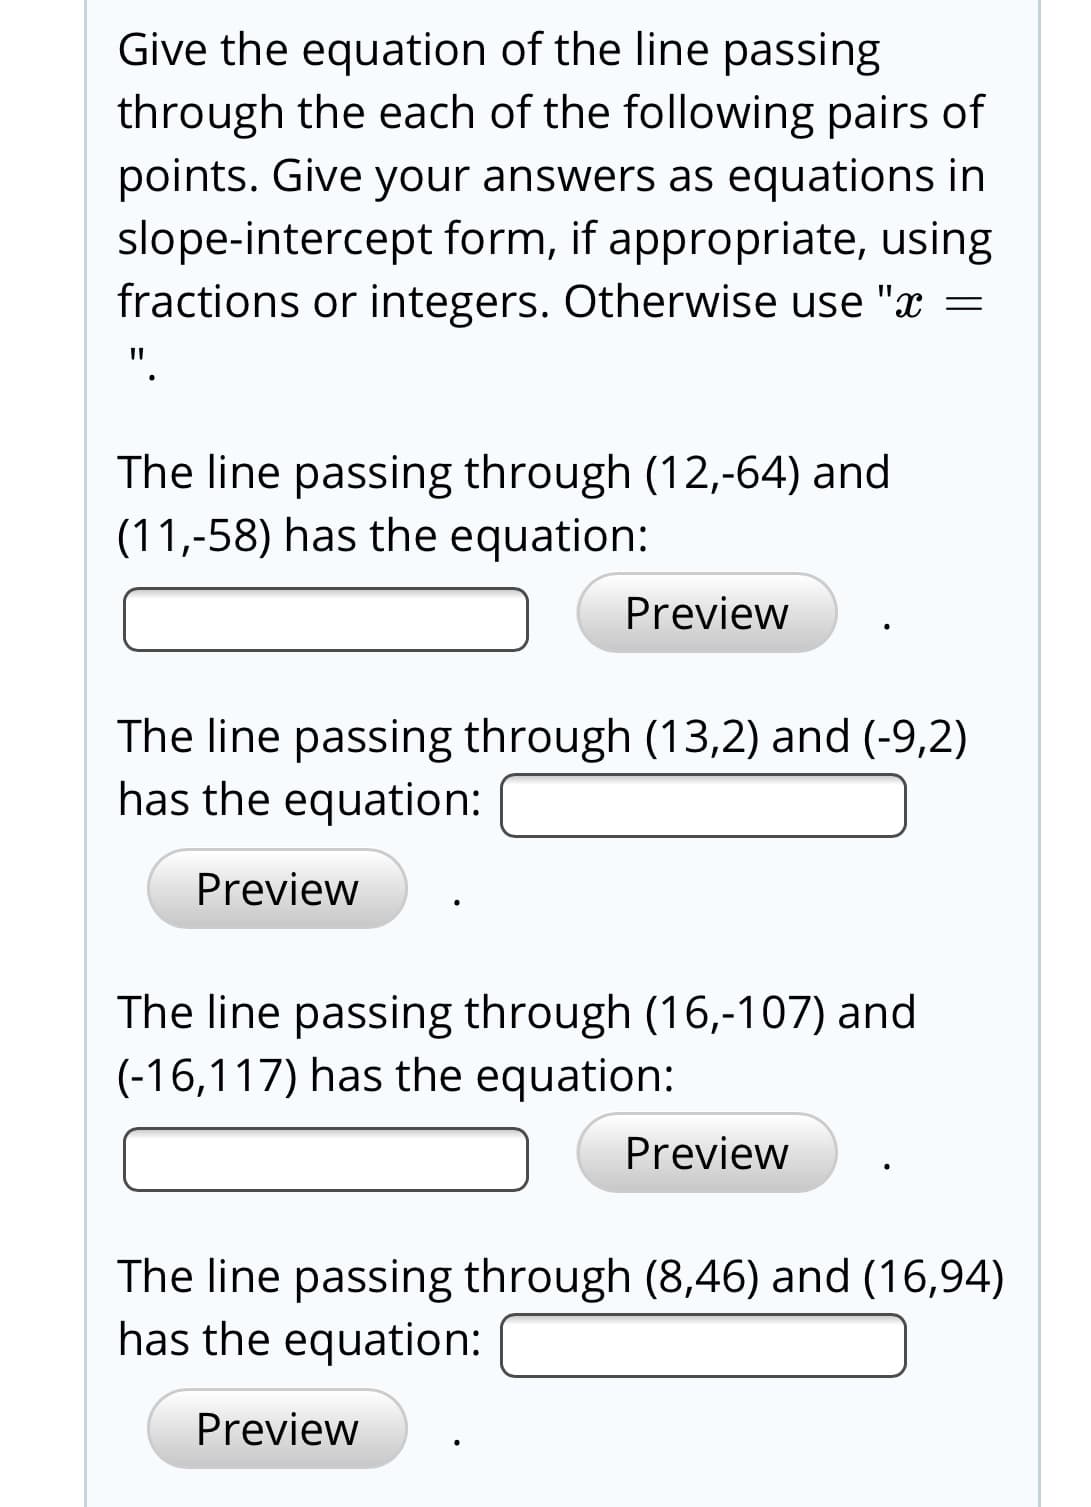 Give the equation of the line passing
through the each of the following pairs of
points. Give your answers as equations in
slope-intercept form, if appropriate, using
fractions or integers. Otherwise use "x
The line passing through (12,-64) and
(11,-58) has the equation:
Preview
The line passing through (13,2) and (-9,2)
has the equation:
Preview
The line passing through (16,-107) and
(-16,117) has the equation:
Preview
The line passing through (8,46) and (16,94)
has the equation:
Preview
